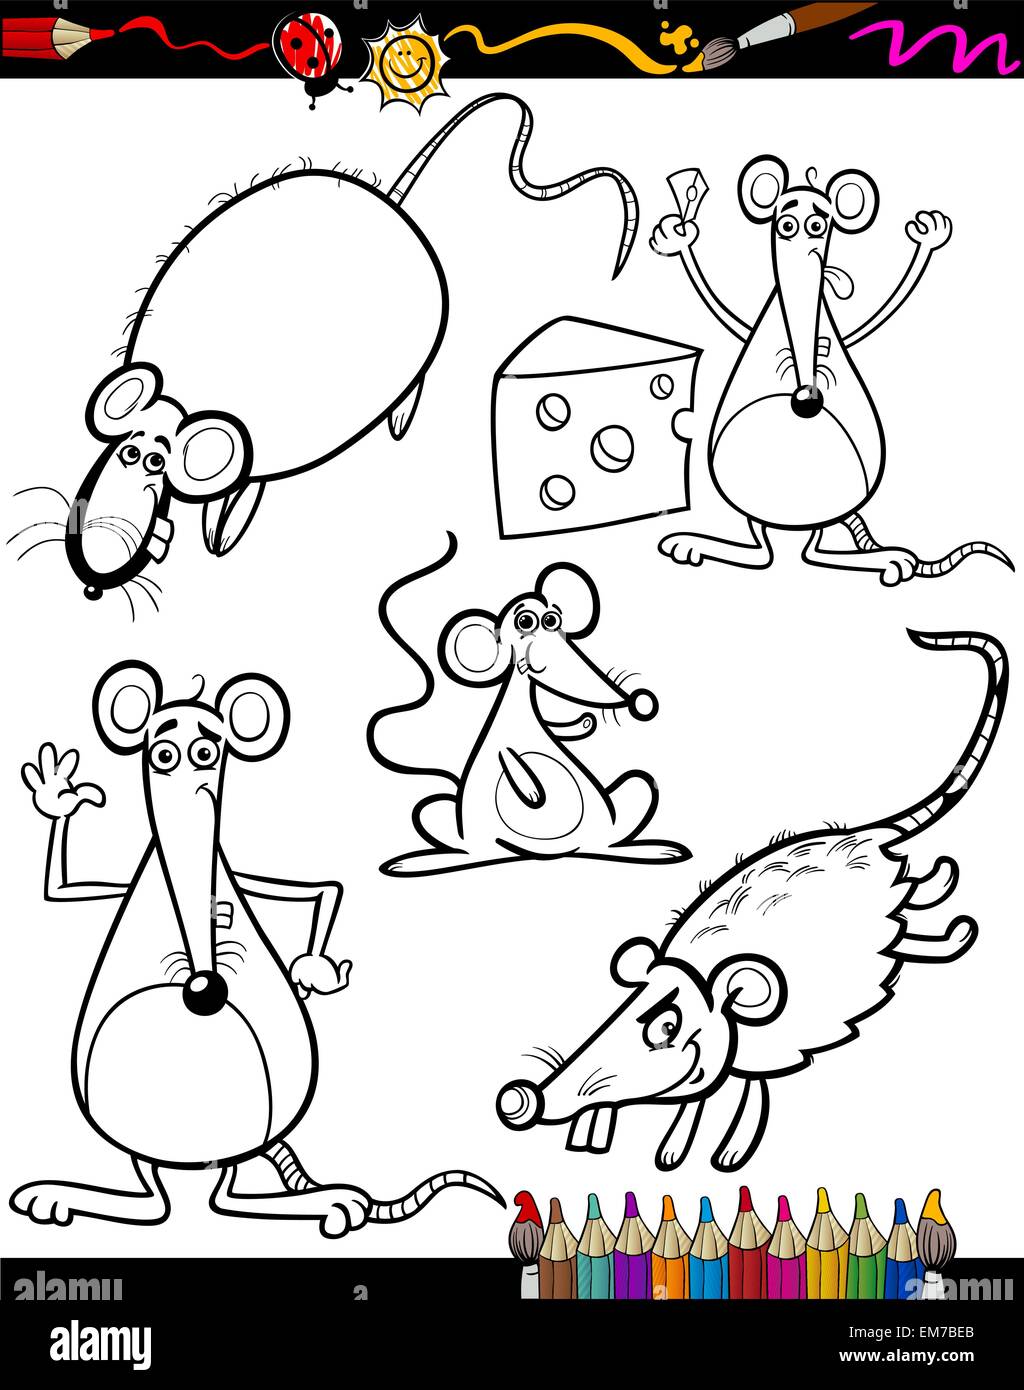 Cartoon Rodents for Coloring Book Stock Vector